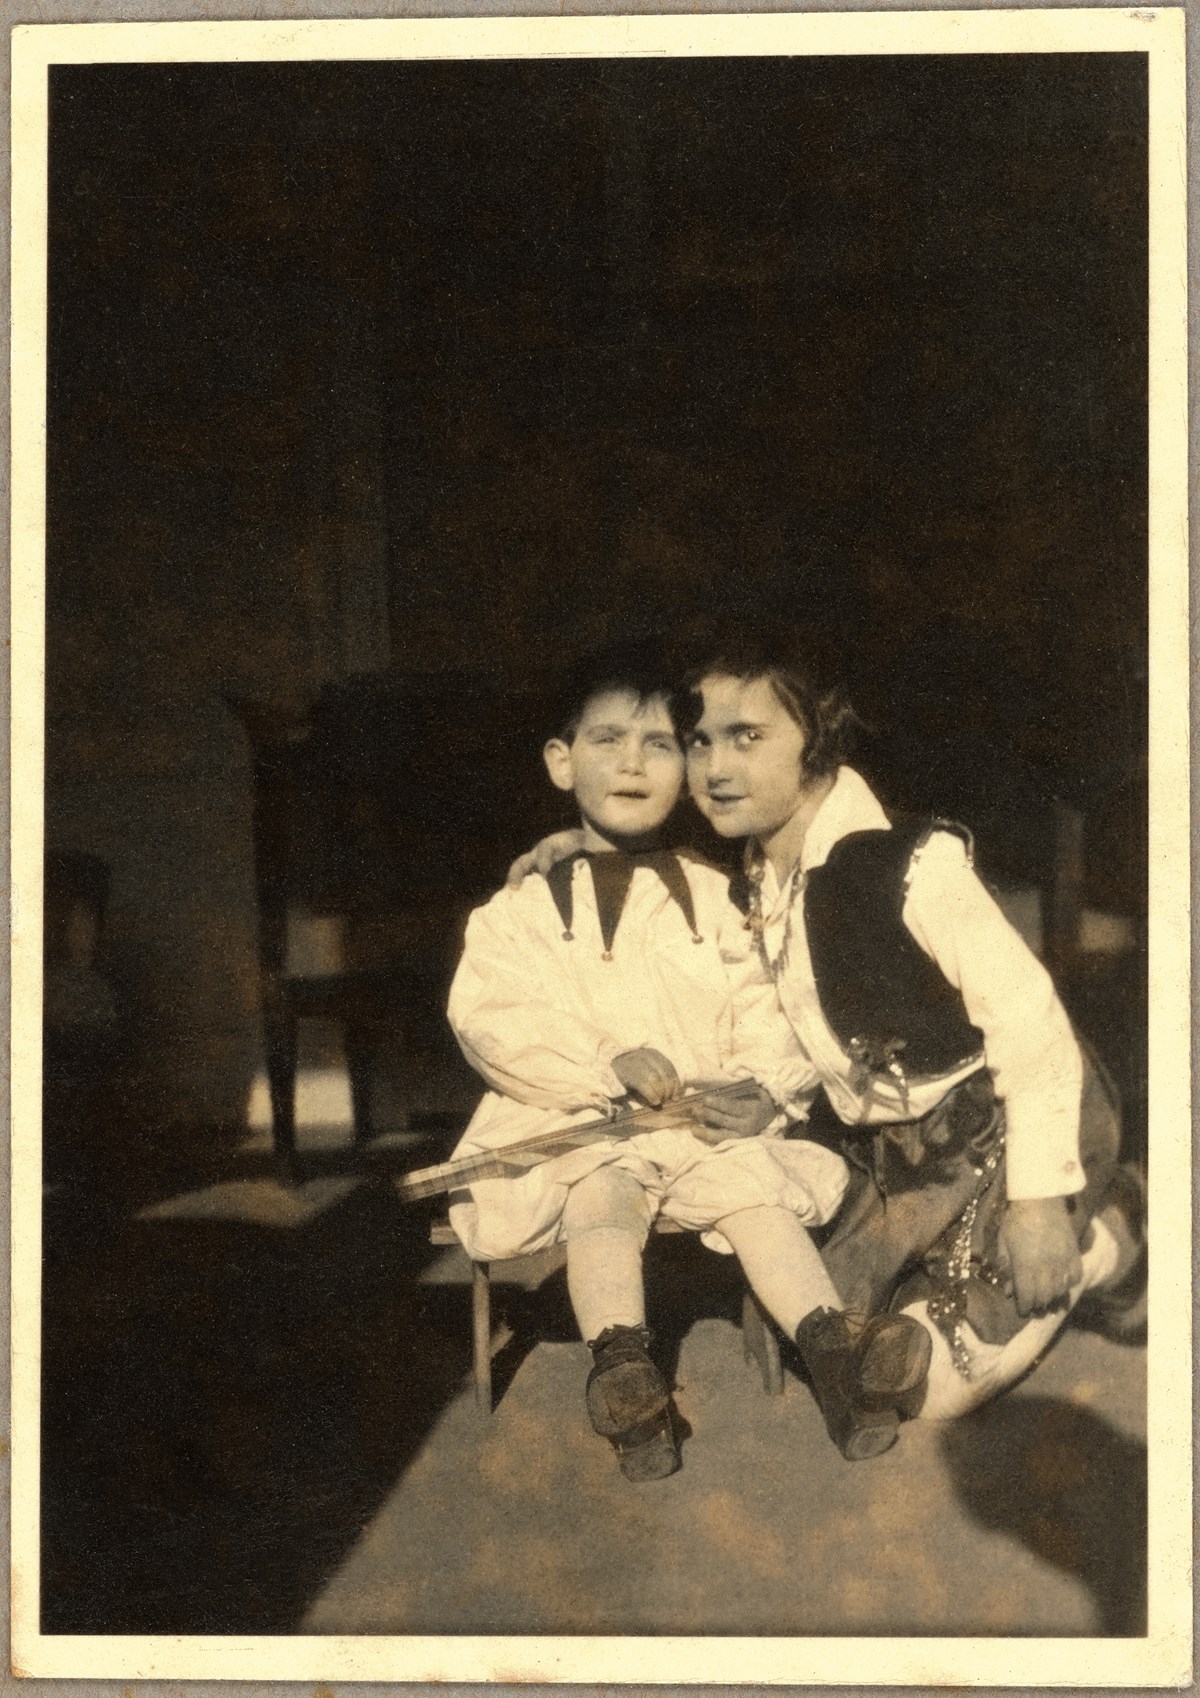 Margot and Anne in Fancy Dress, 1932. Image courtesy of the Anne Frank Trust.